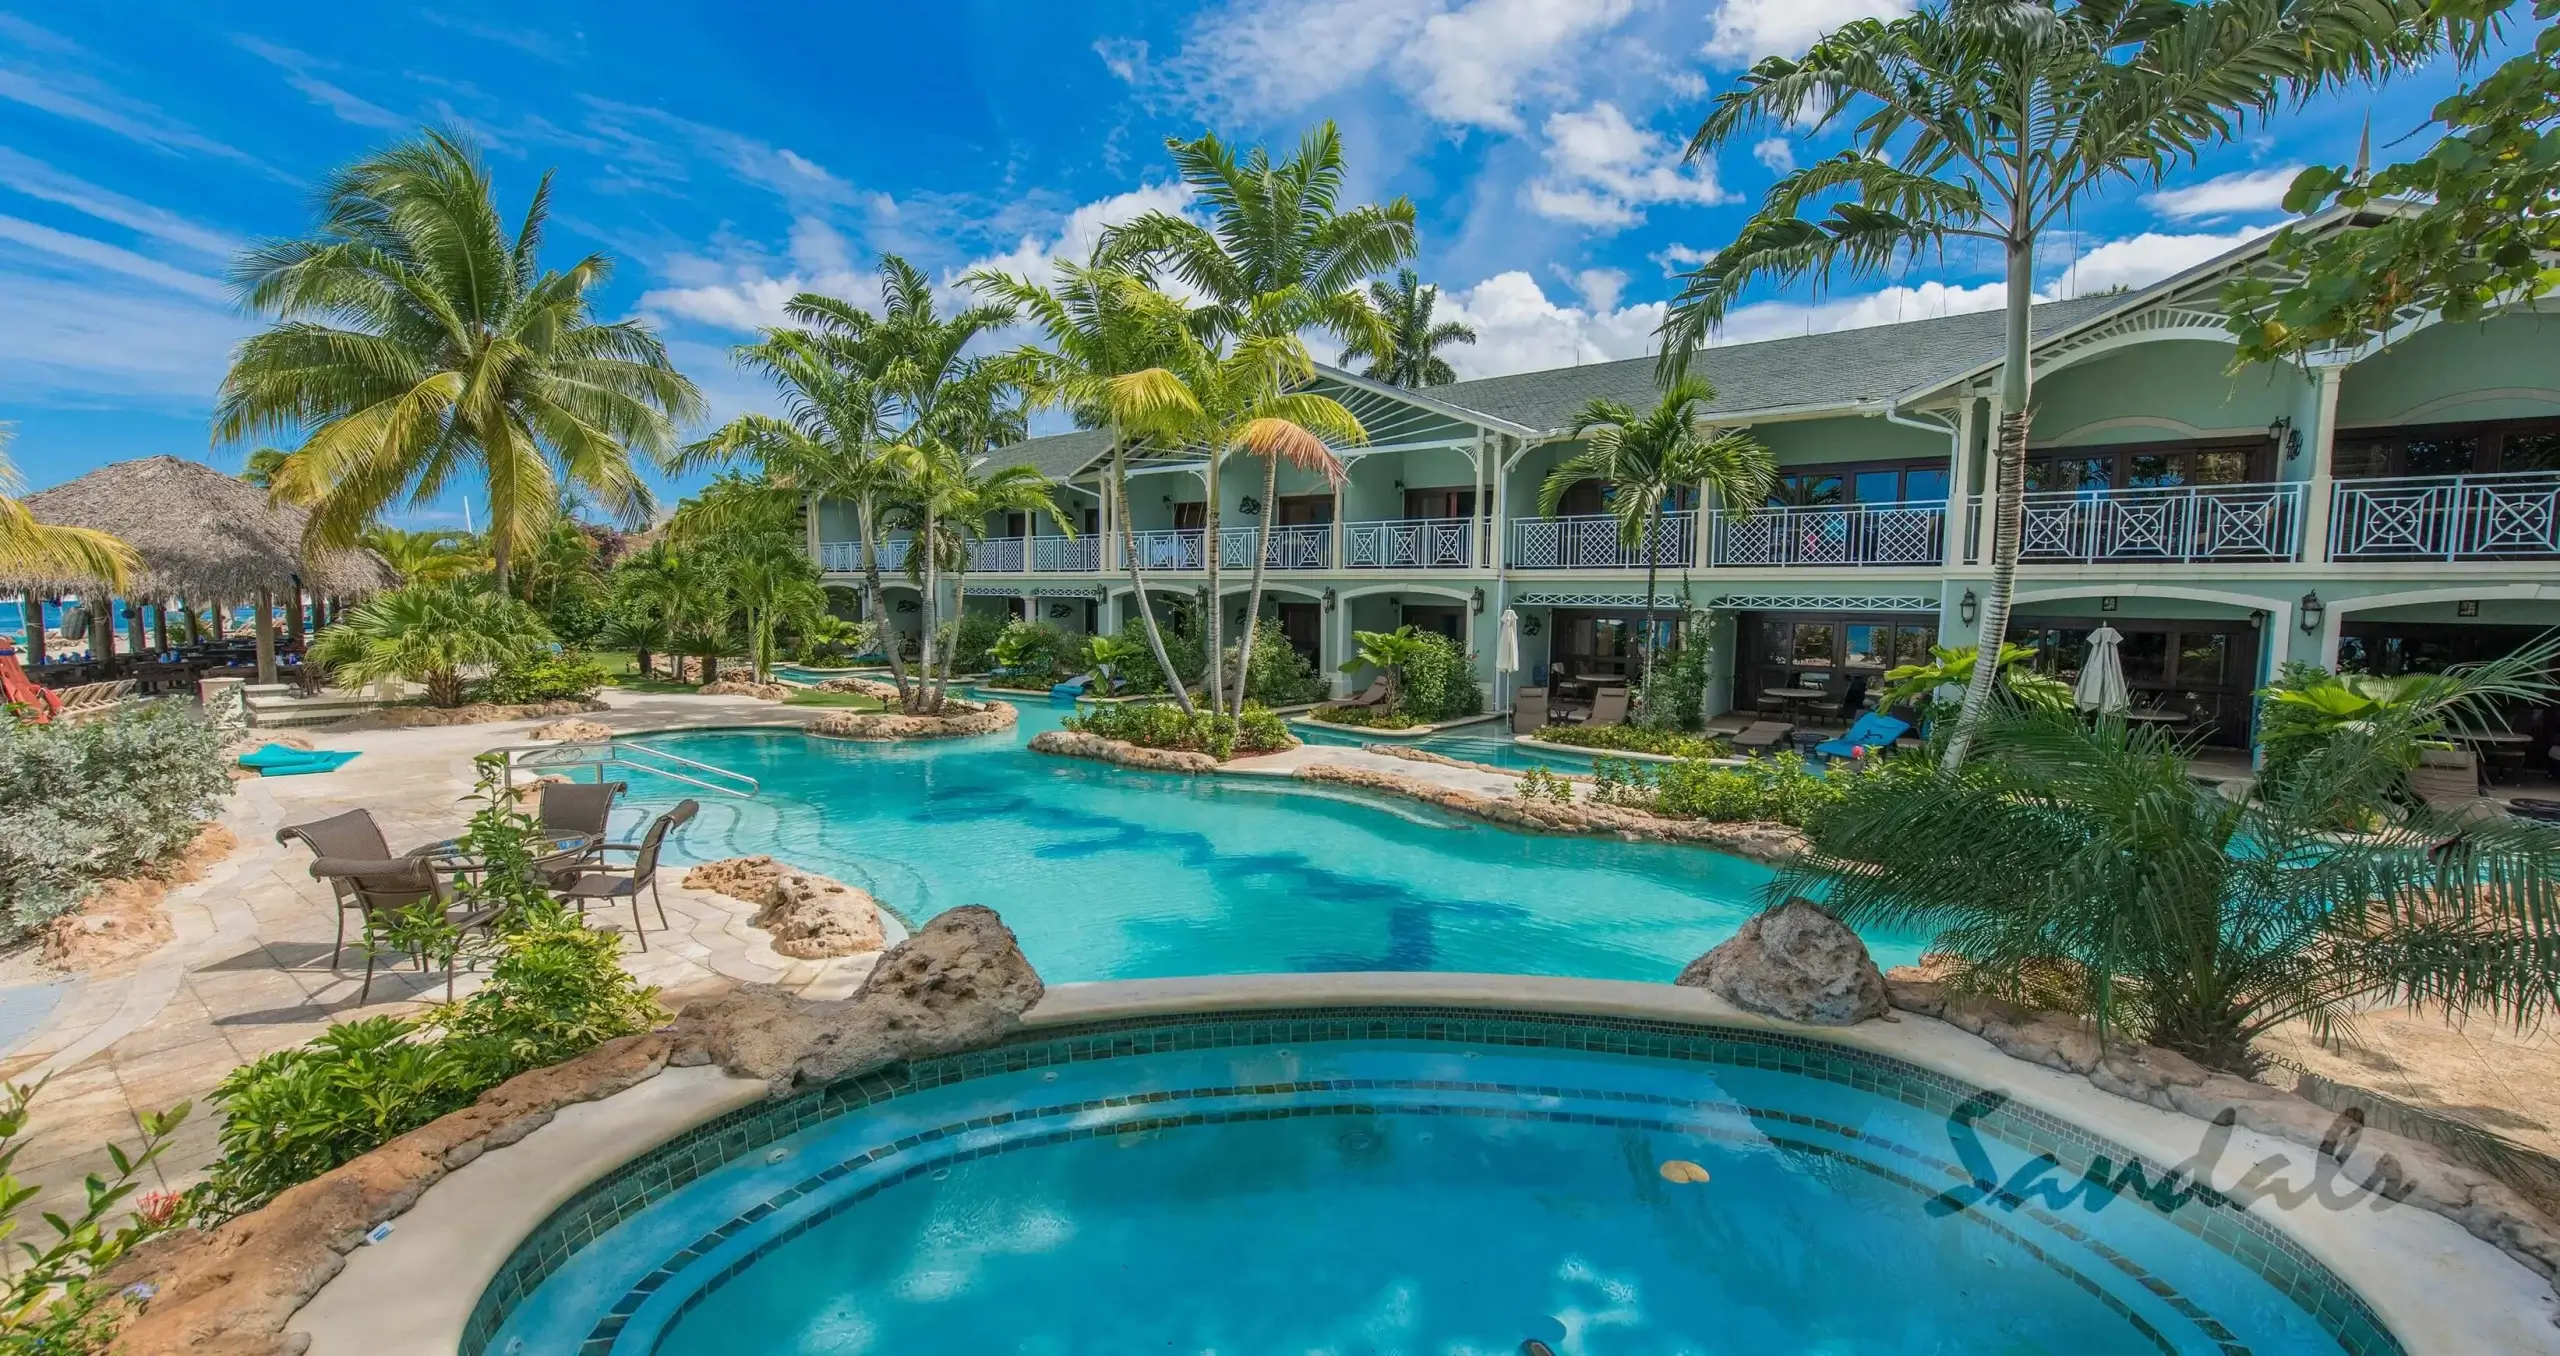 Sandals Negril with large swimming pool and beautiful ocean views in Jamaica.